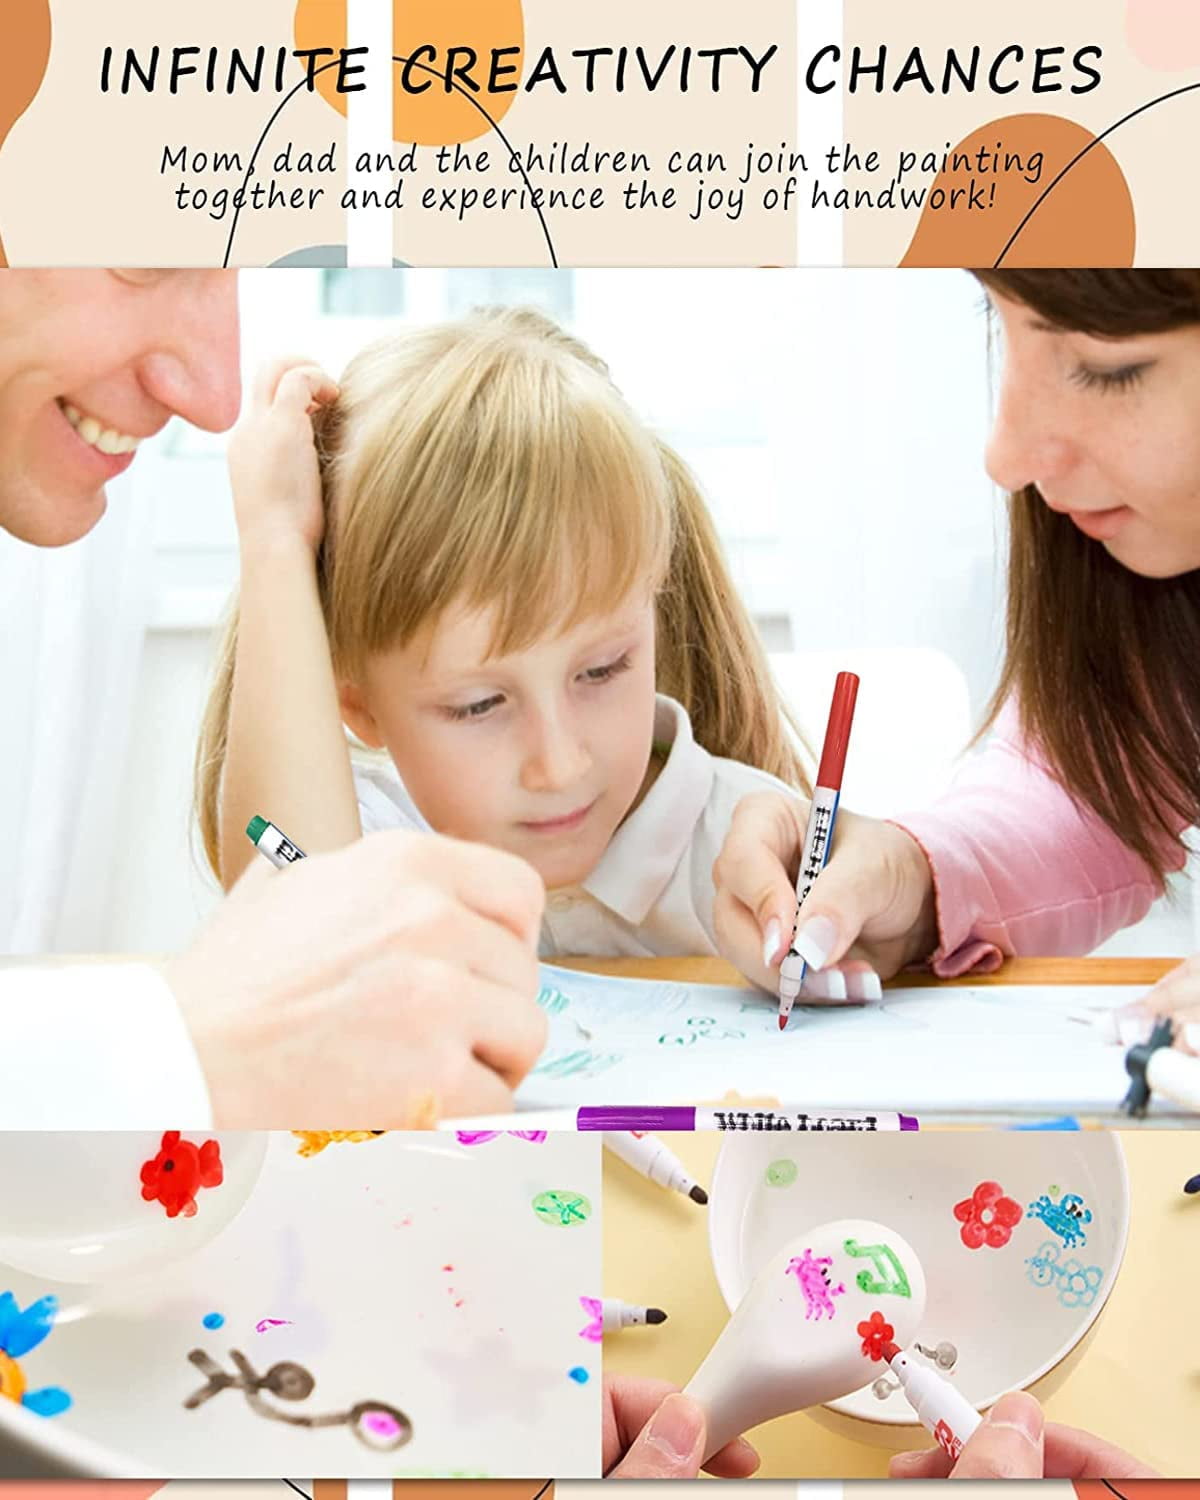 Magic Water Markers - Kids Floating Painting – MyTrendVerse